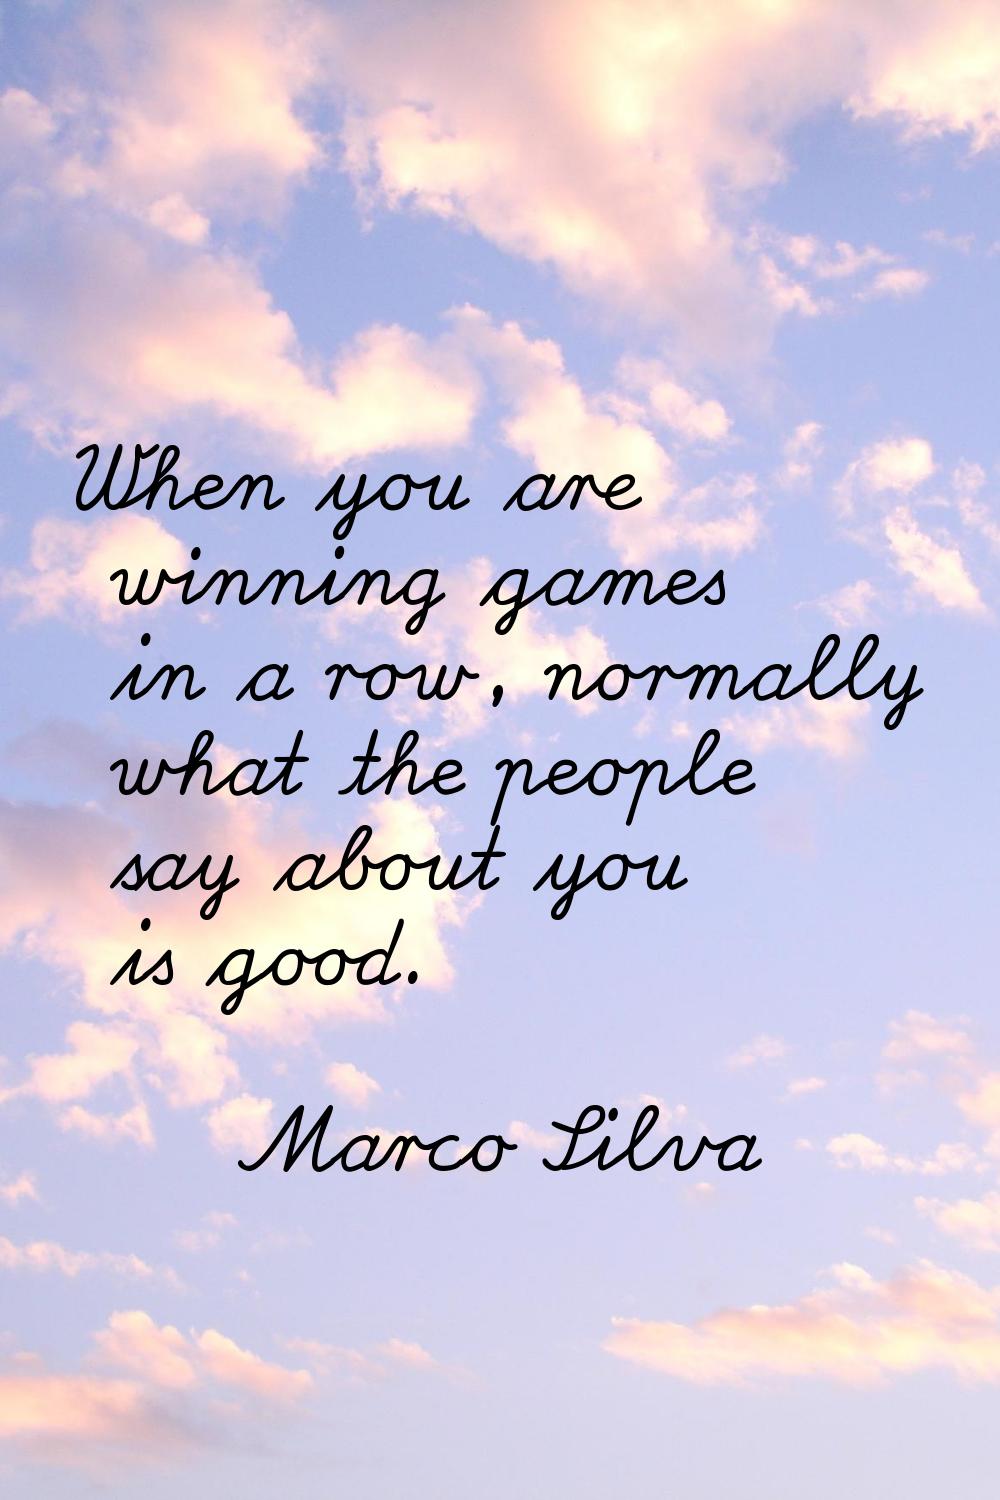 When you are winning games in a row, normally what the people say about you is good.